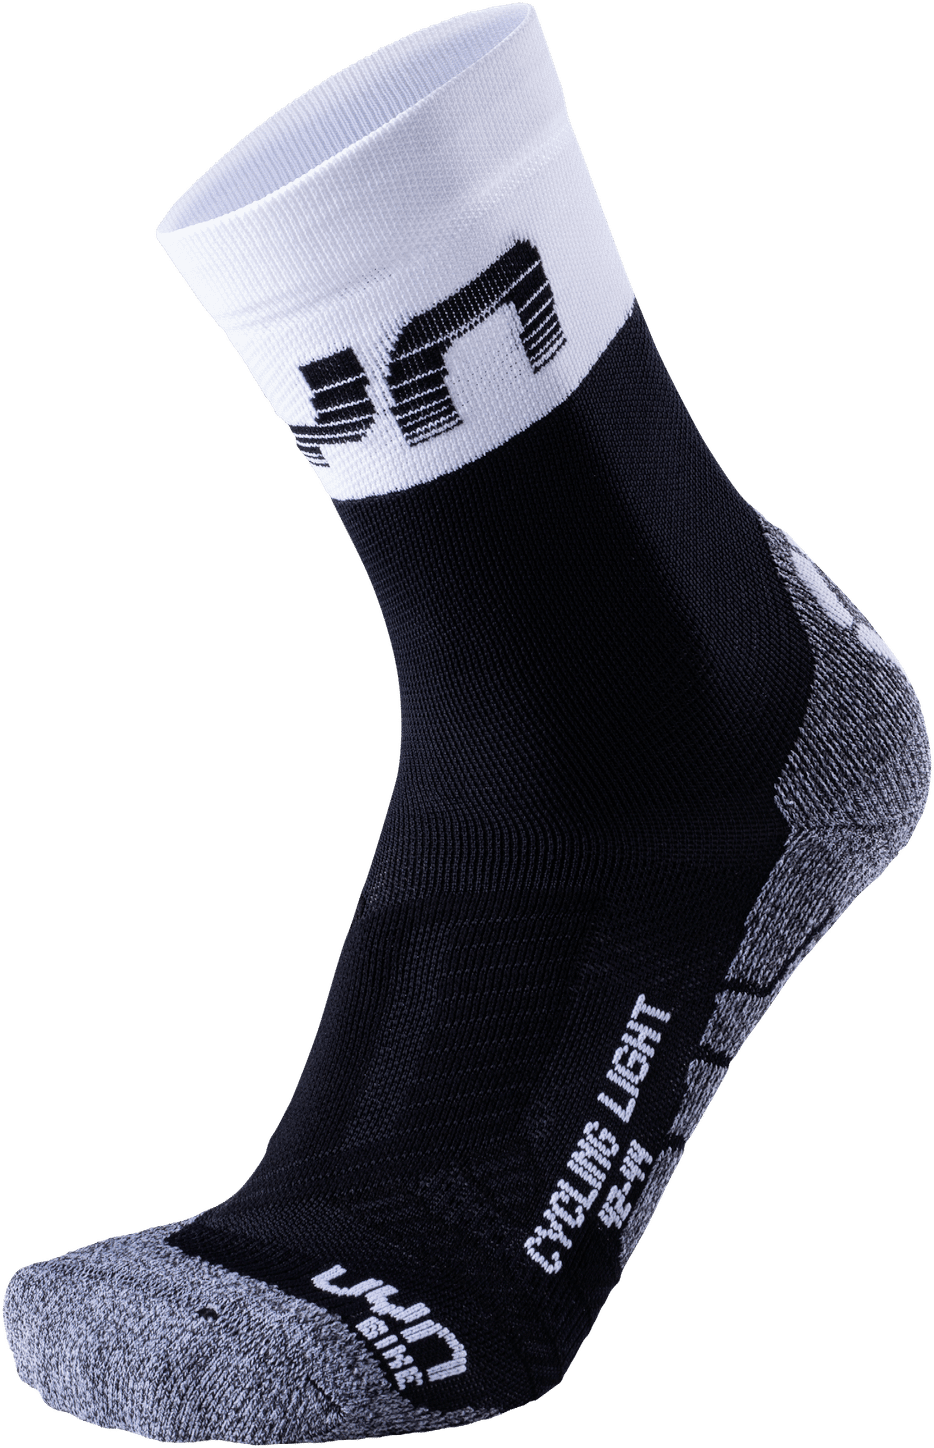 Uyn Light - Chaussettes vélo homme | Hardloop